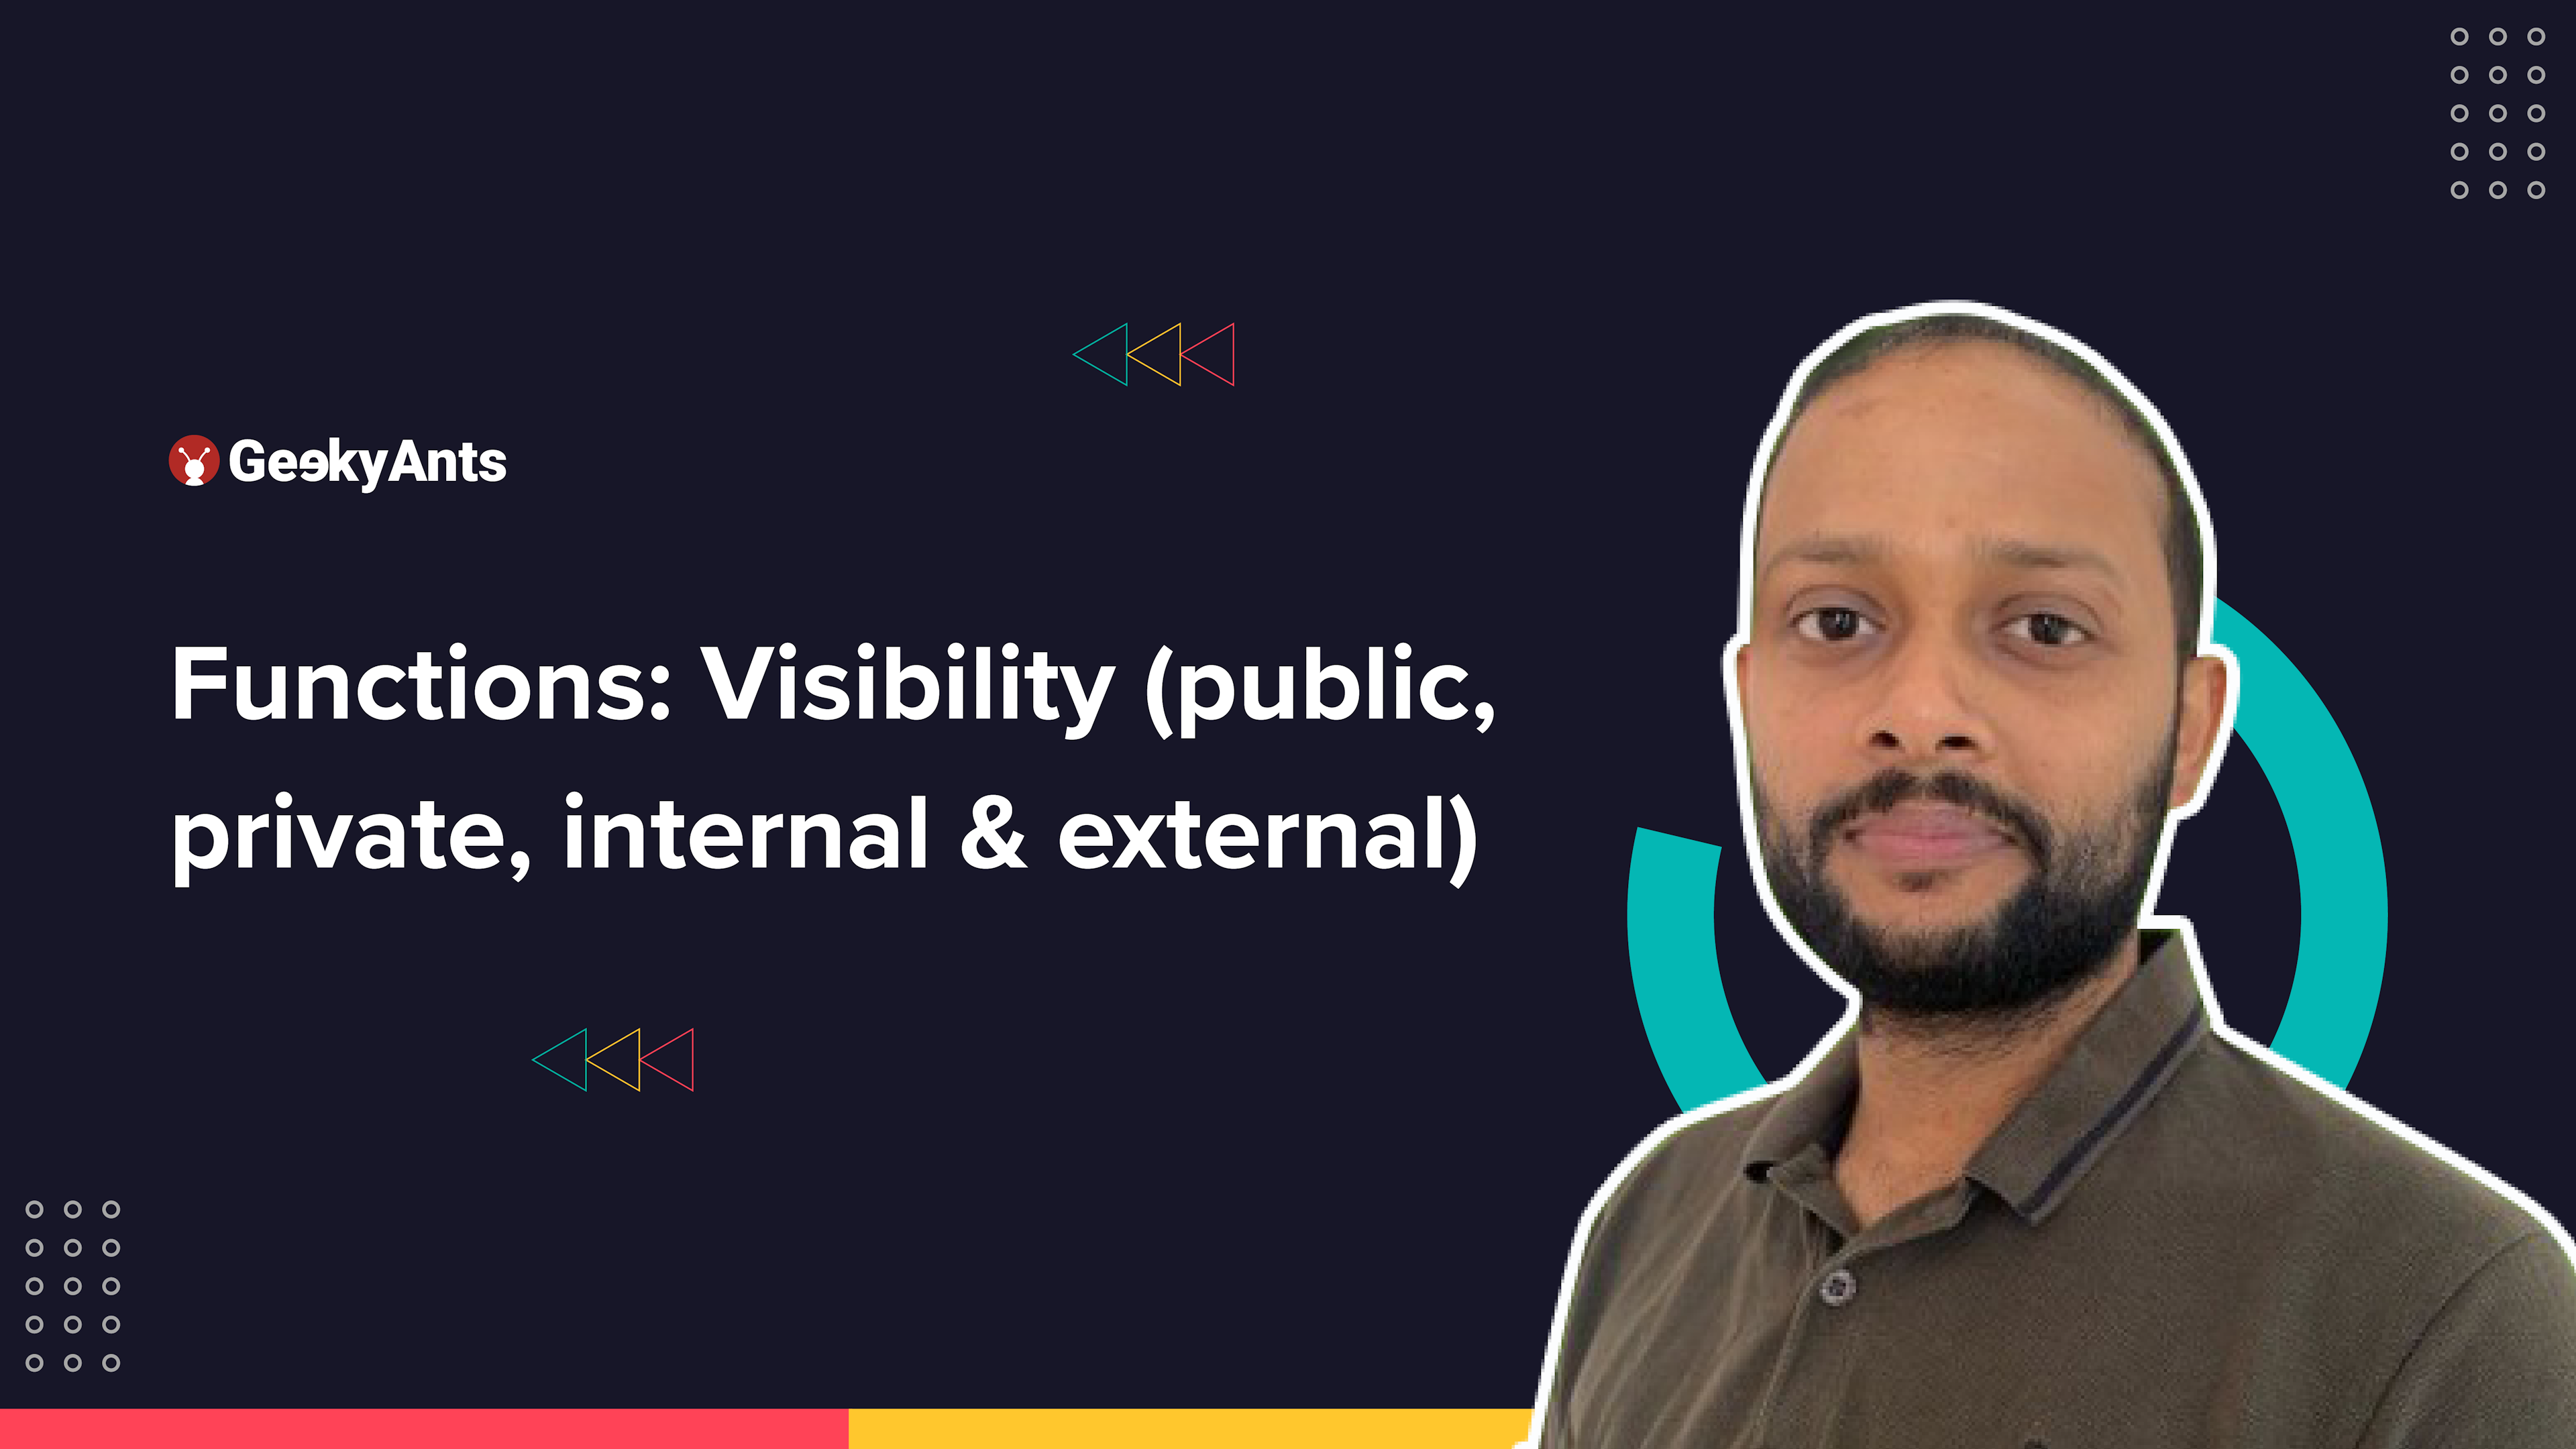 Functions: Visibility (public, private, internal & external)